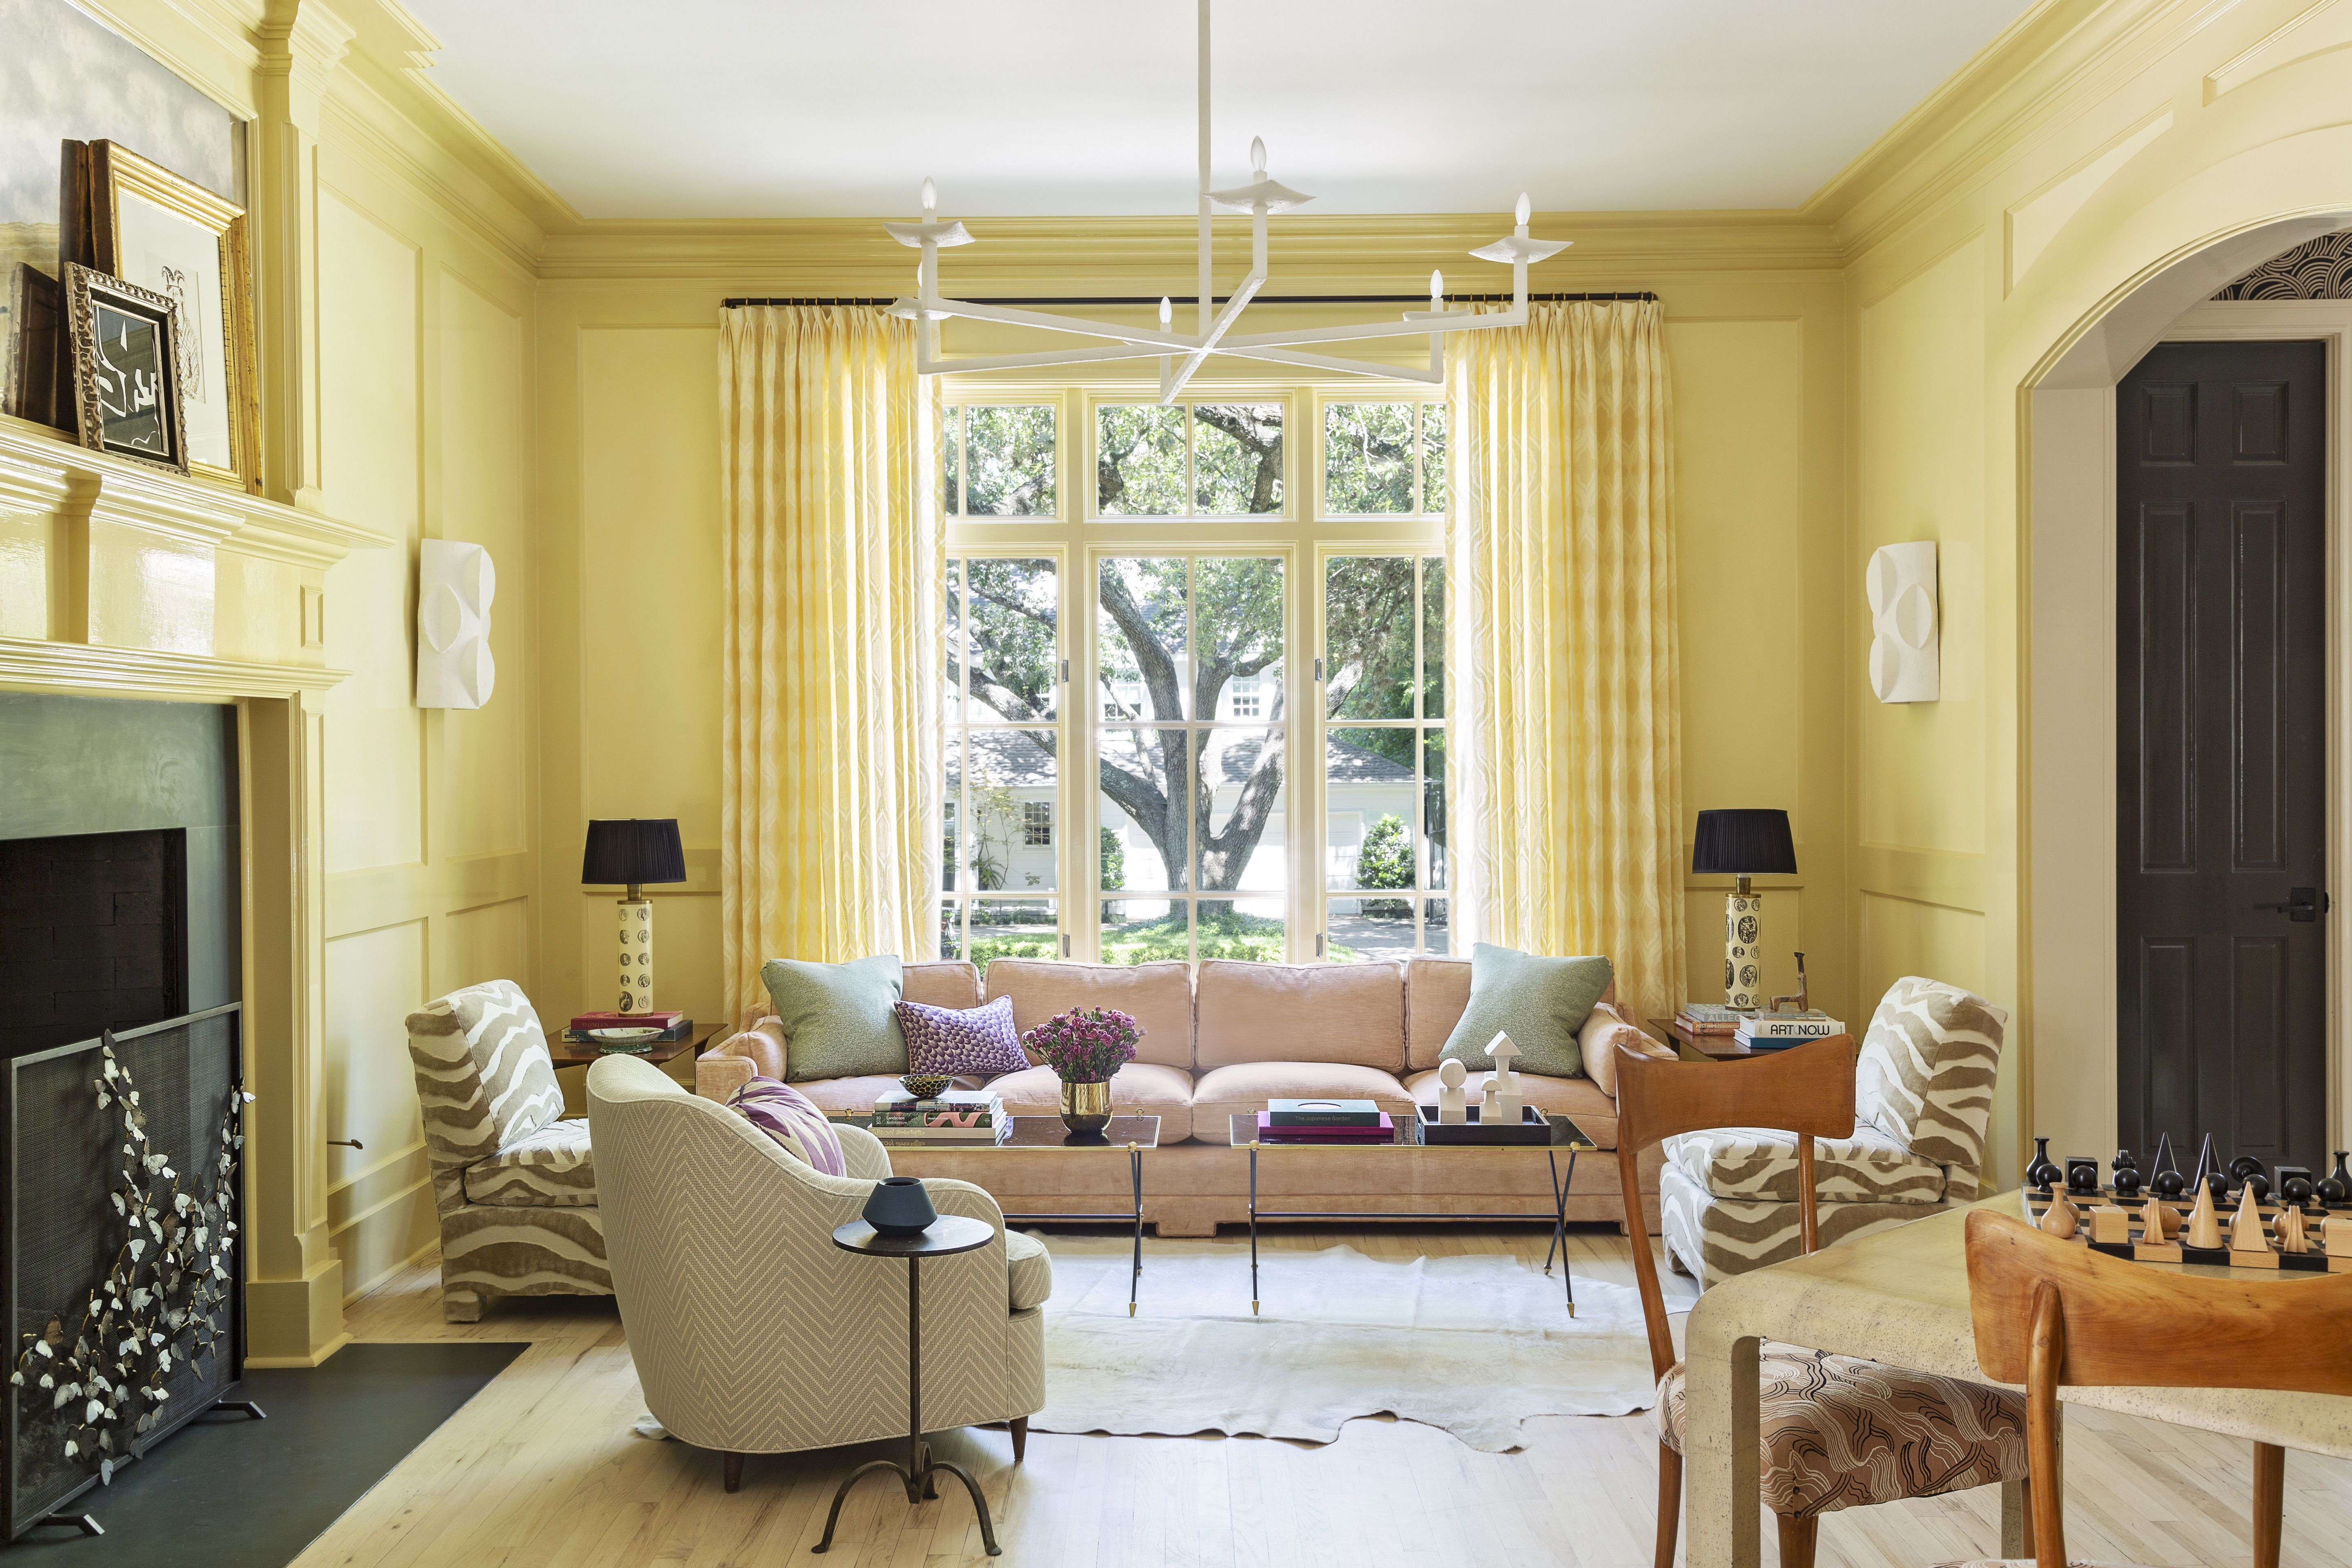 8 Reasons Why You Should Paint Your Room Yellow  Yellow walls living room,  Yellow dining room, Yellow room